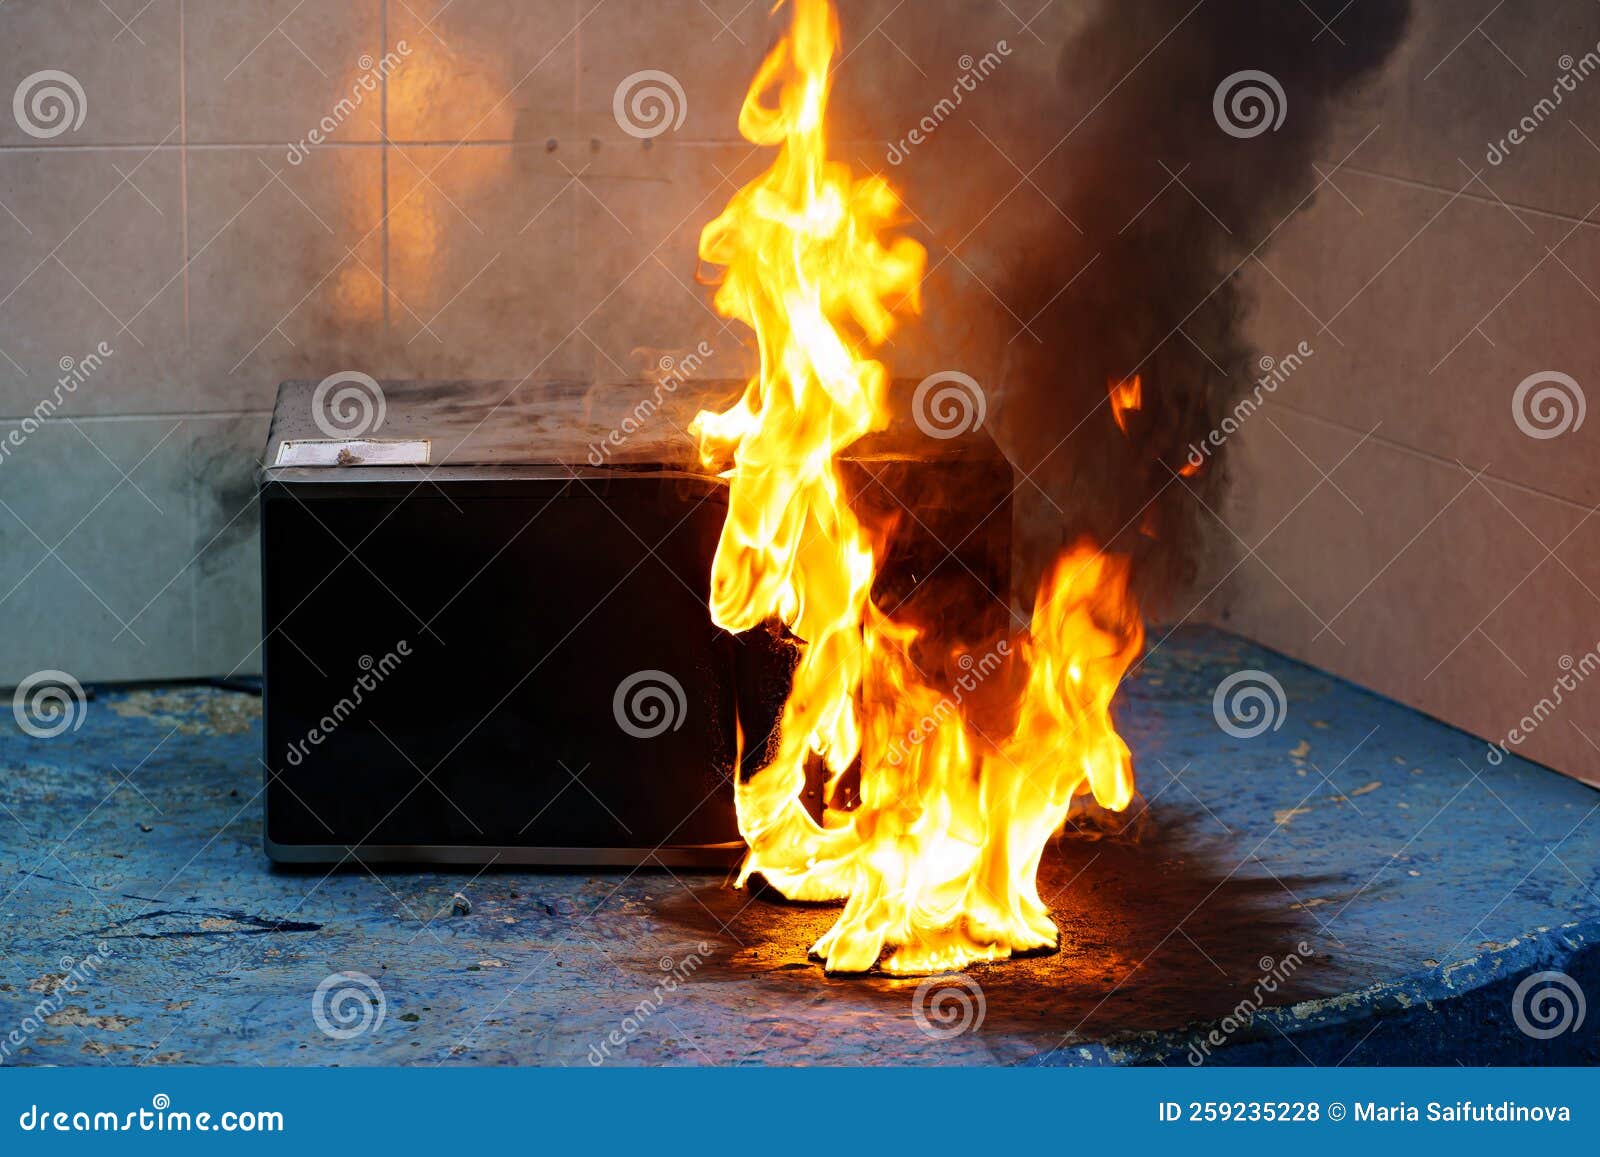 Microwave Oven on Fire. the Concept of Fire in the Kitchen. Stock Photo -  Image of soot, breakdowns: 259235228